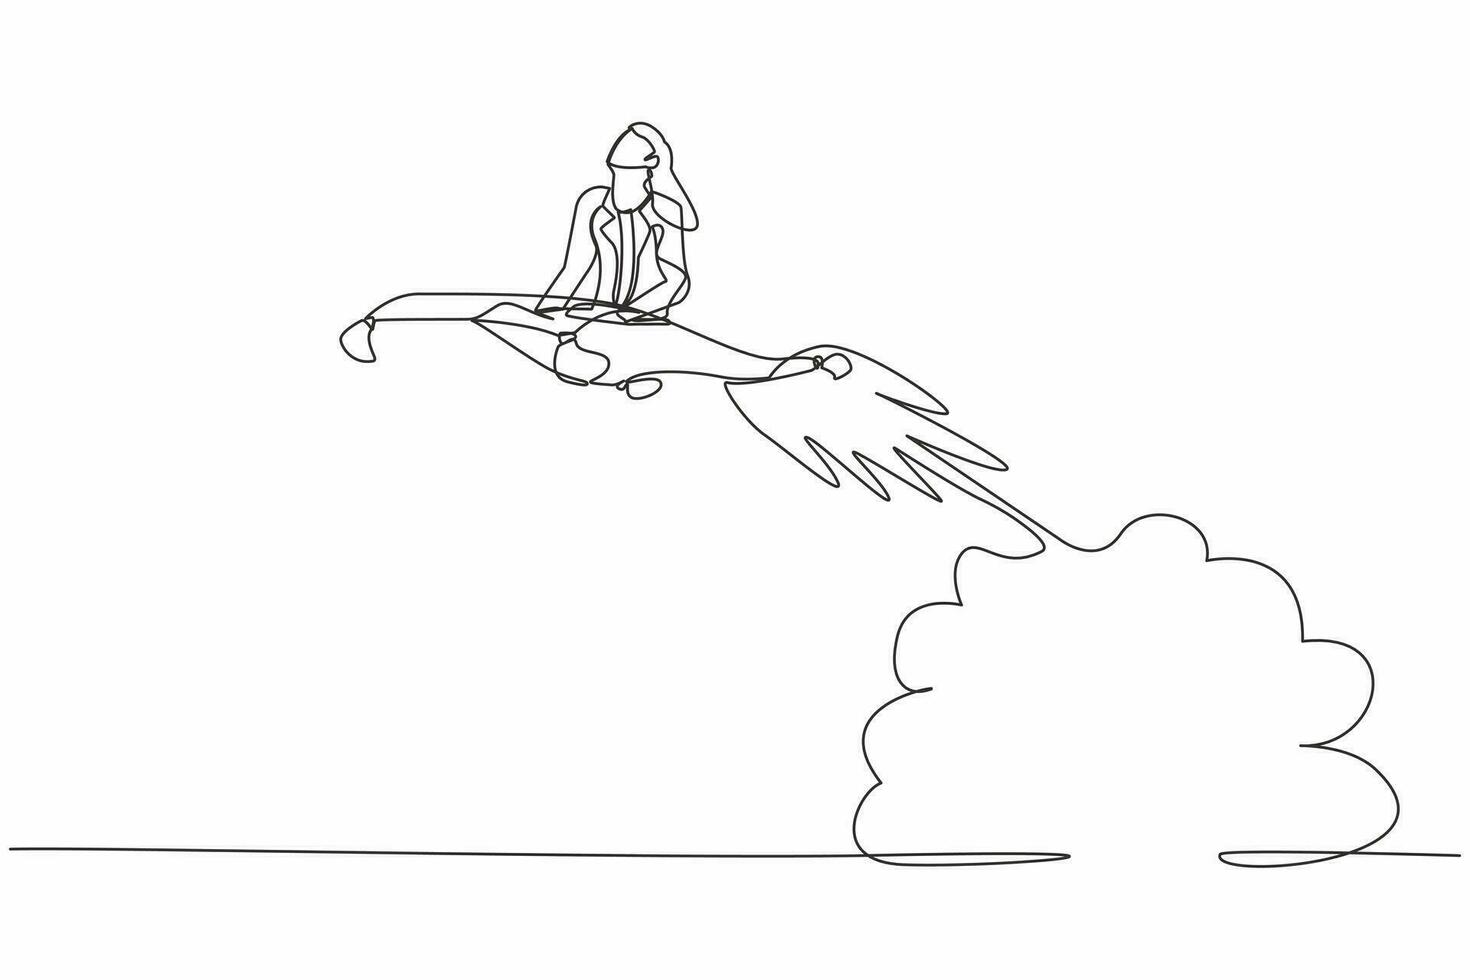 Single one line drawing businesswoman riding magic carpet rocket flying in the sky. Launch new textile business. Acceleration or increase sales growth. Continuous line draw design vector illustration